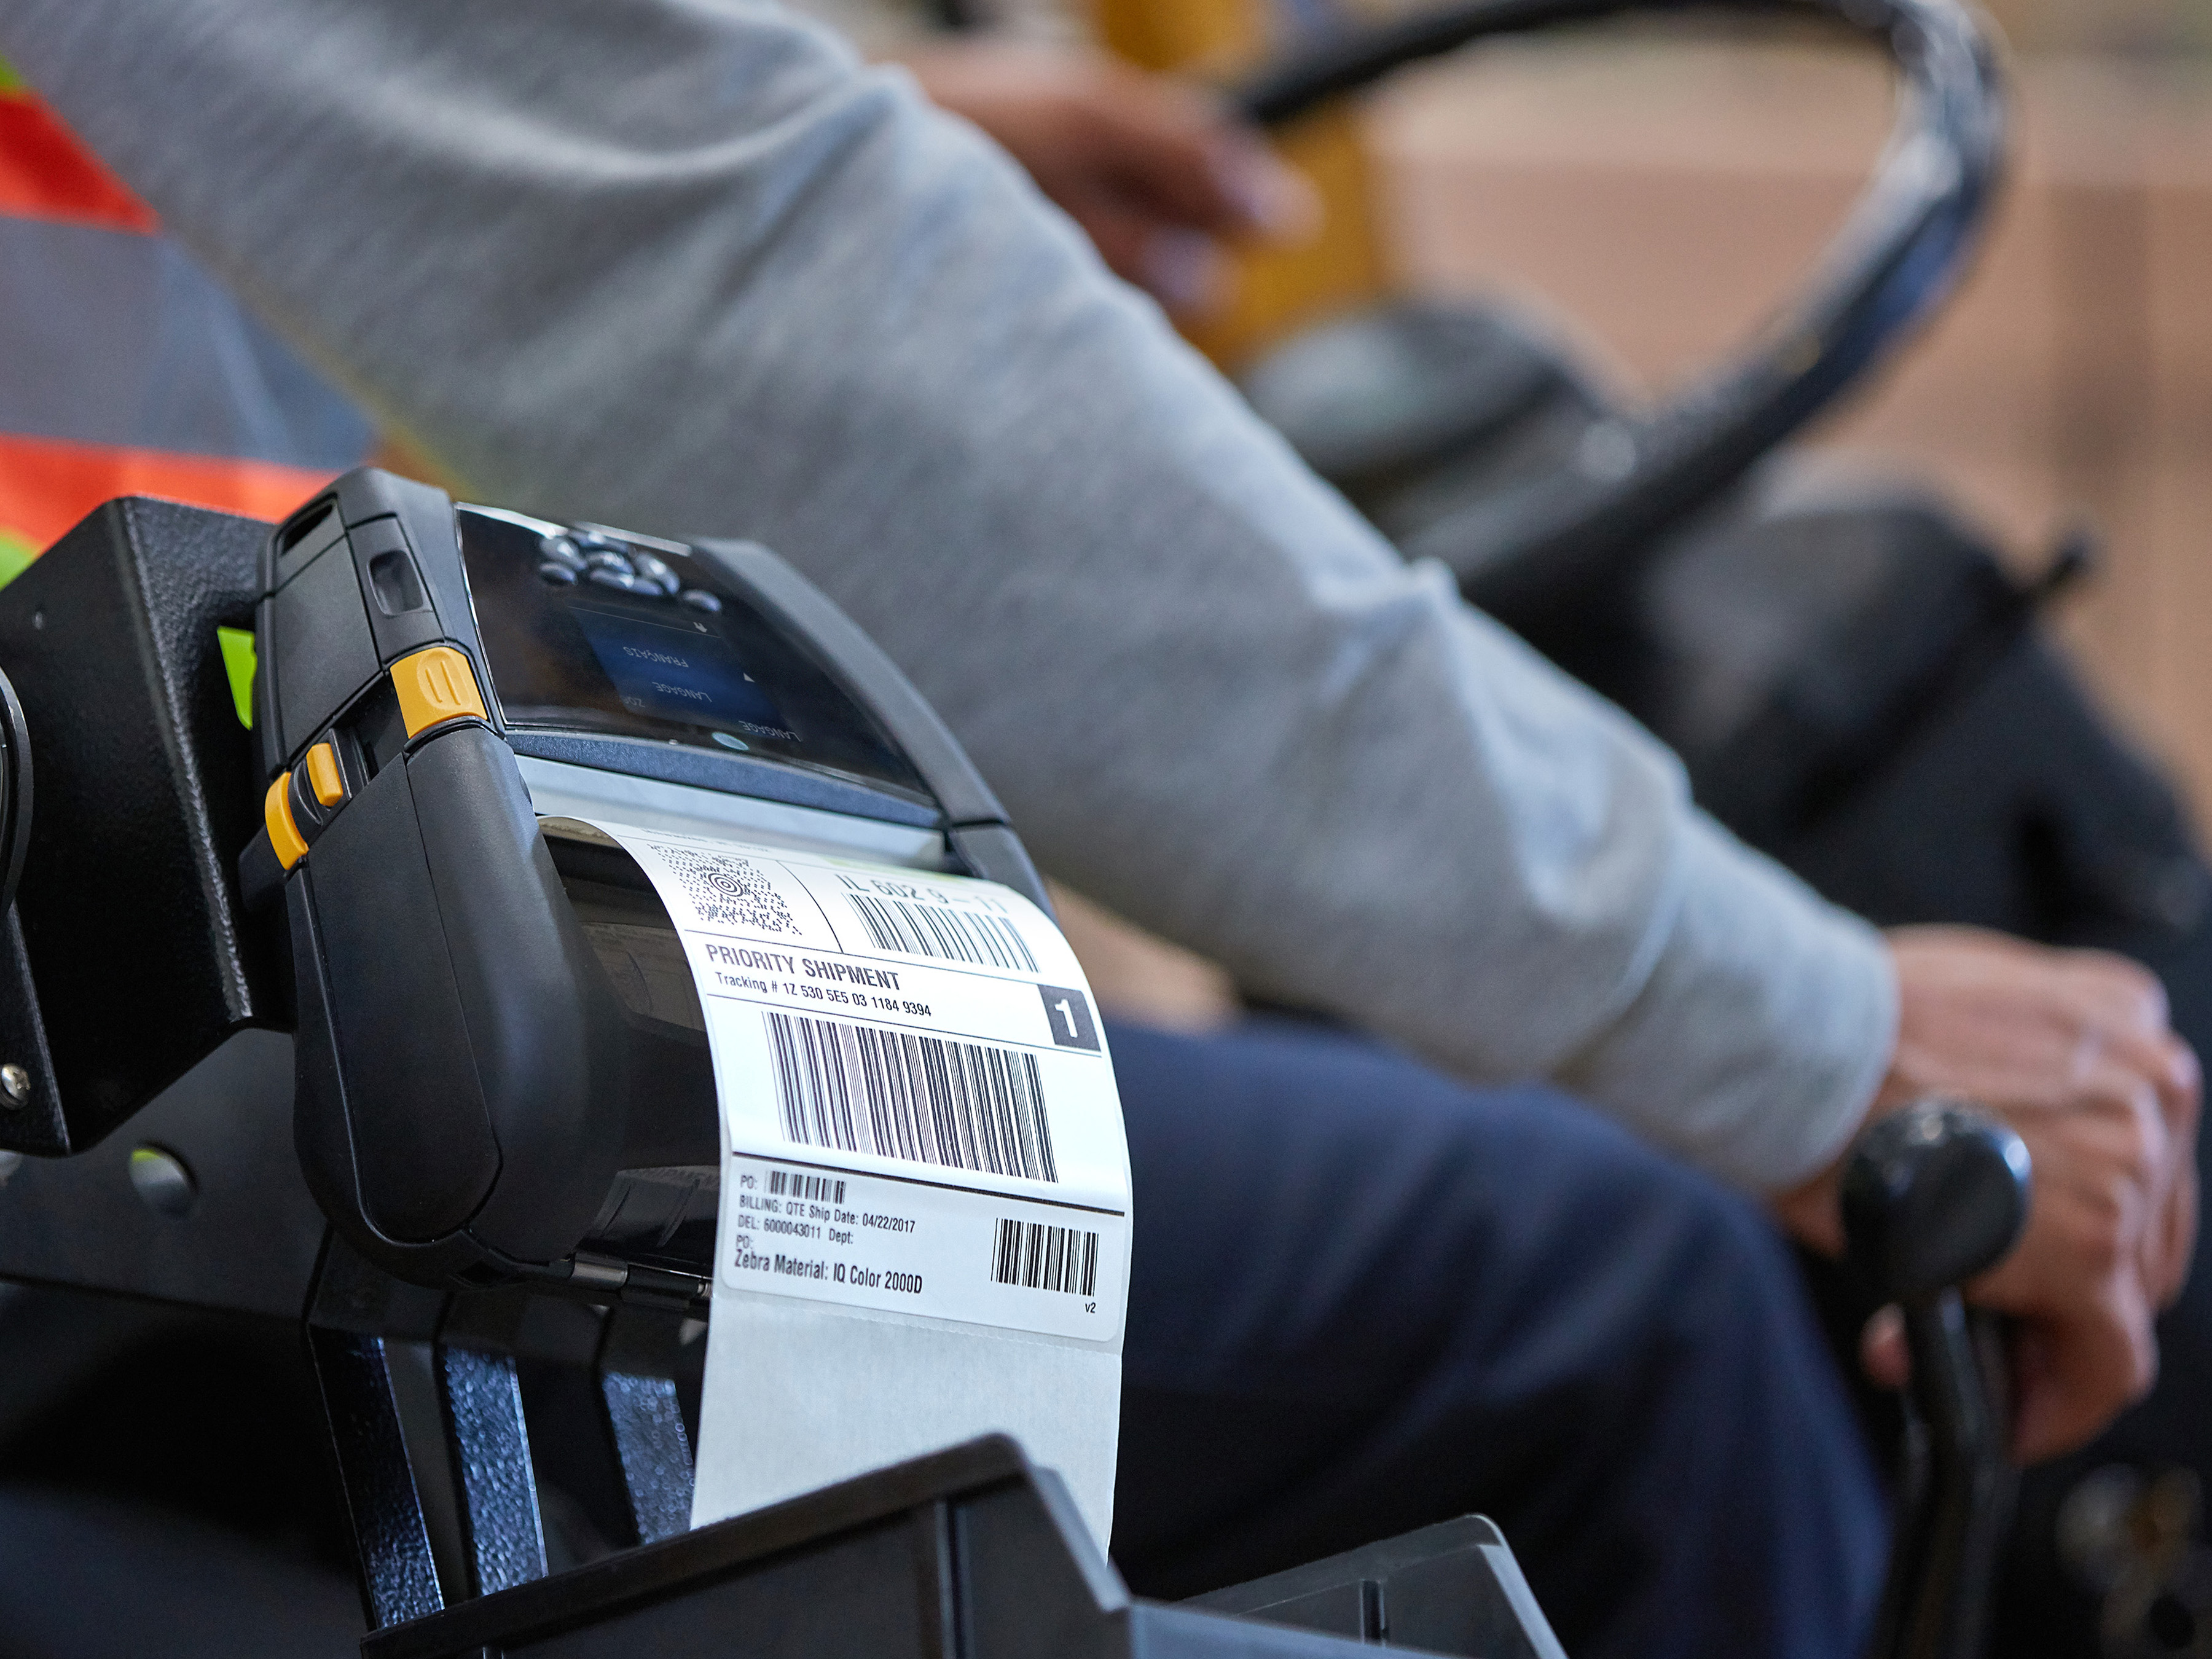 Zebra mobile printer mounted on a vehicle prints a shipping label on the go